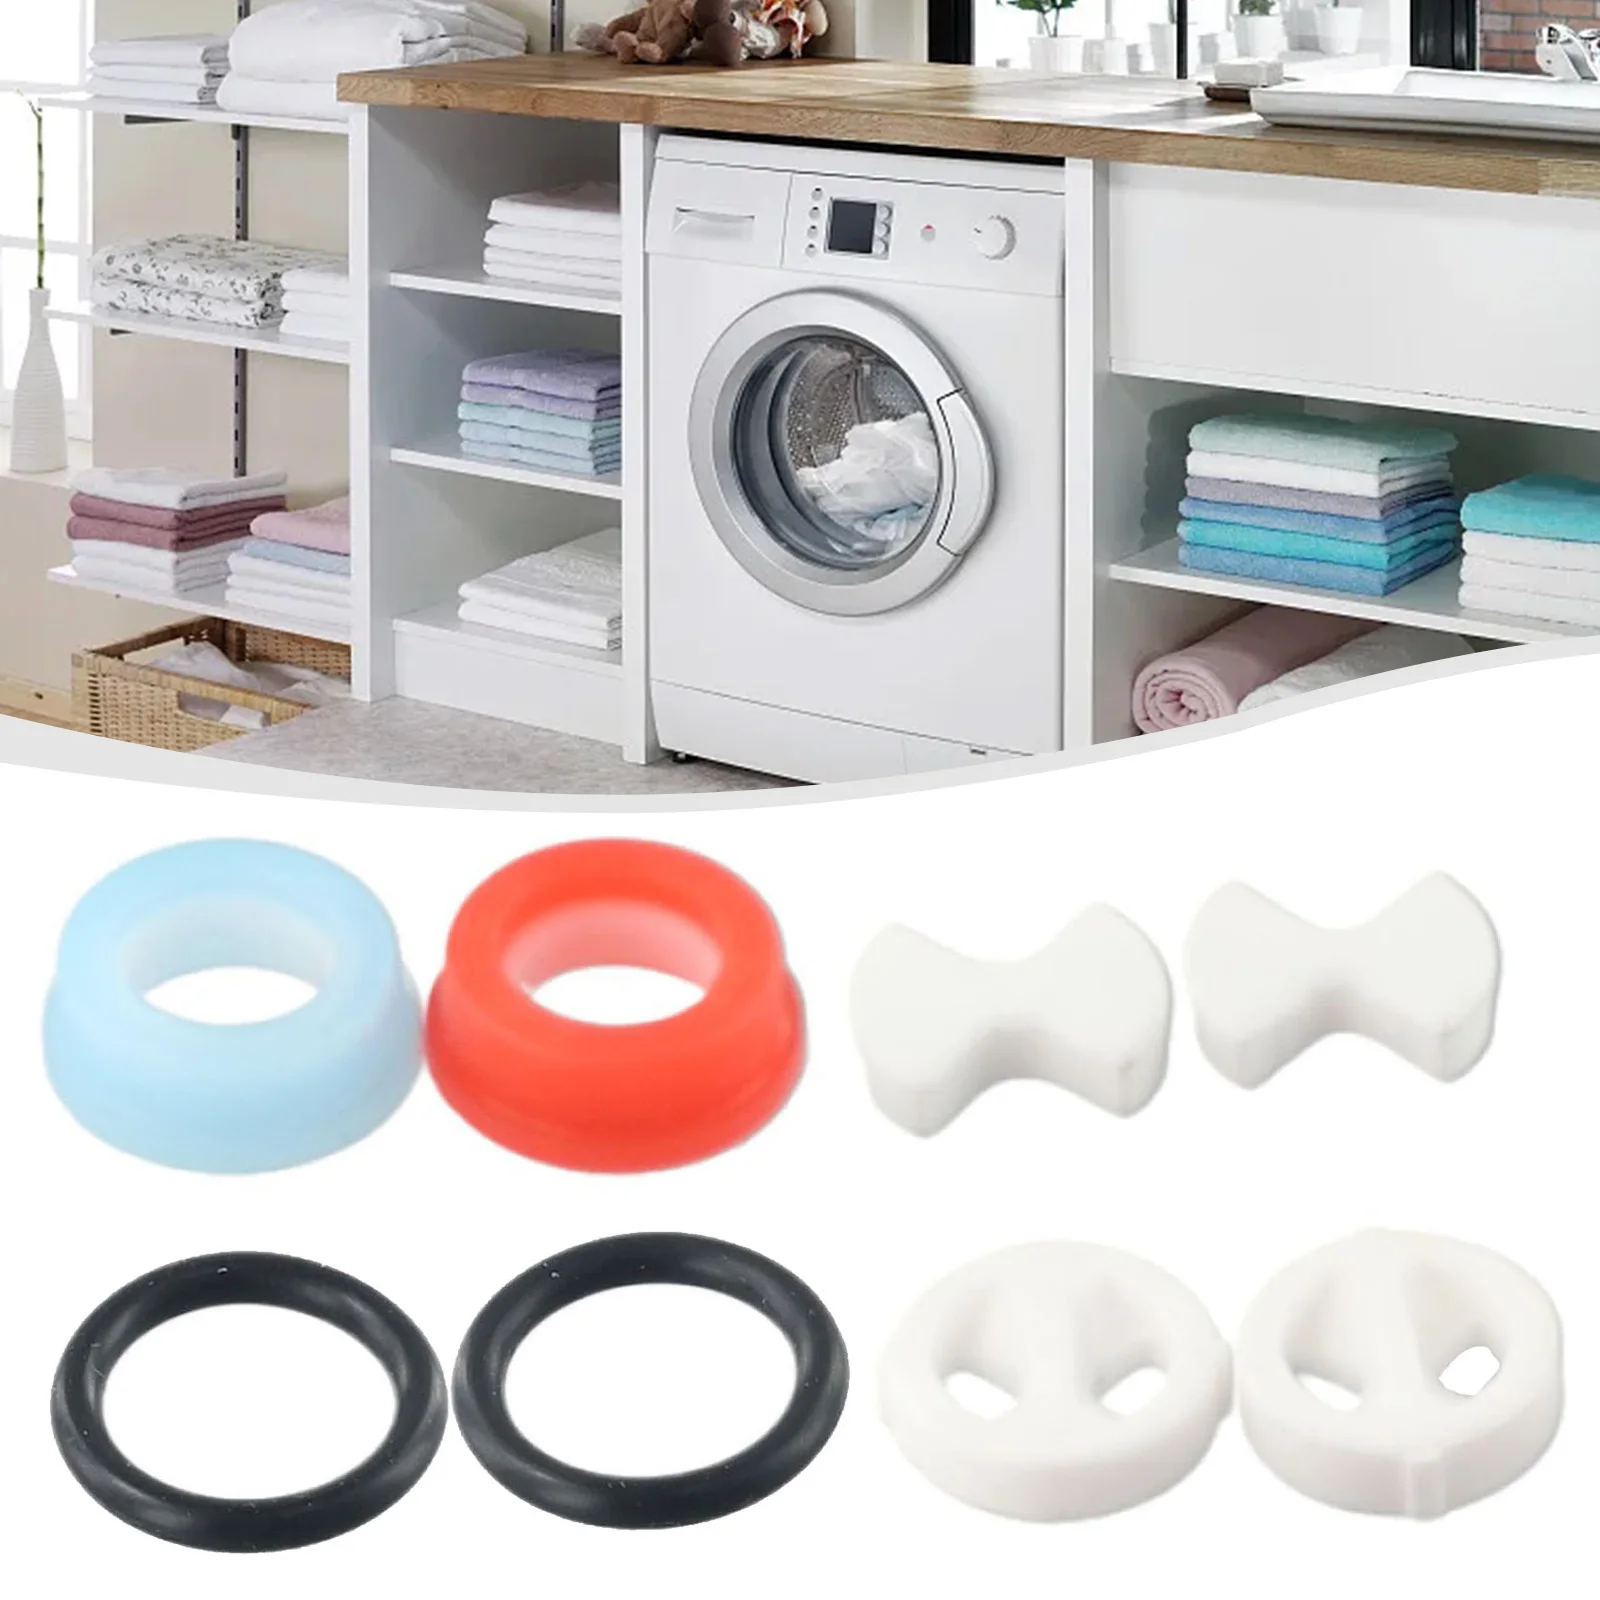 

Durable Silicon Washer Kit Ceramic Discs Ceramic & Rubber Easy To Install Accessories Available Ceramic&rubber